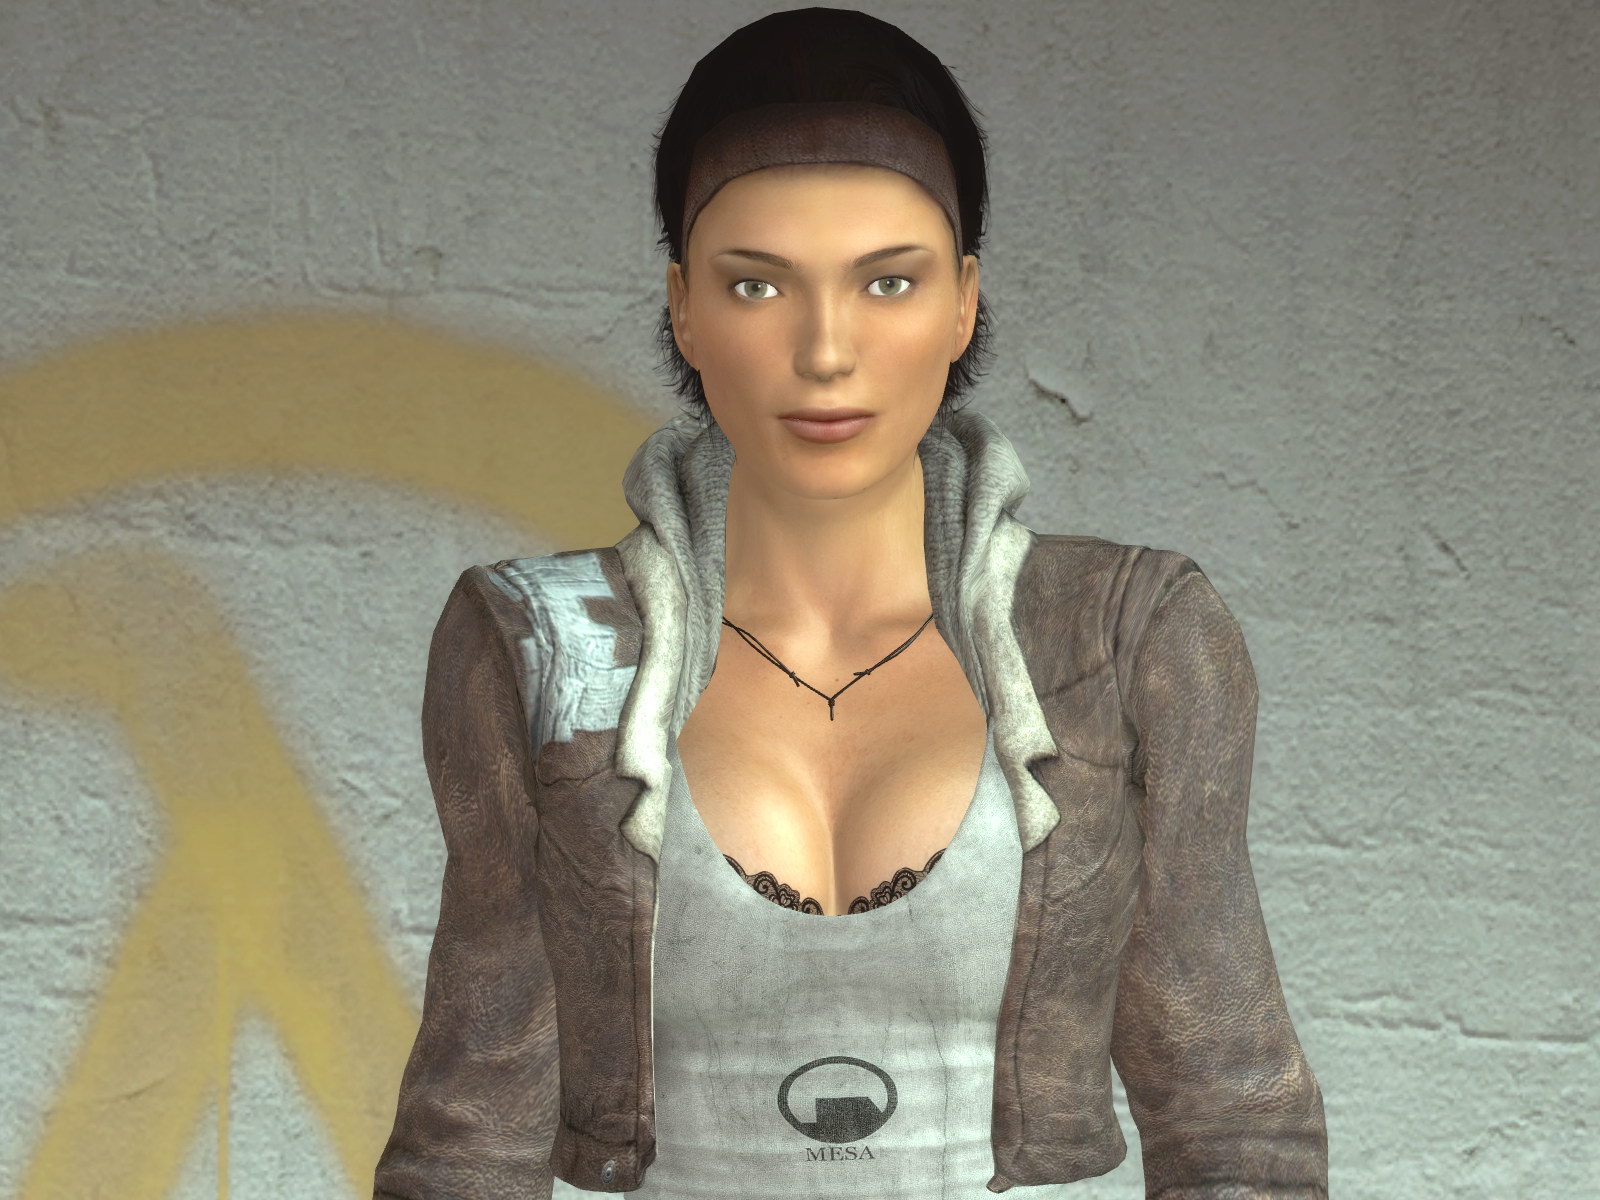 Half Life Alyx Wallpapers High Quality | Download Free